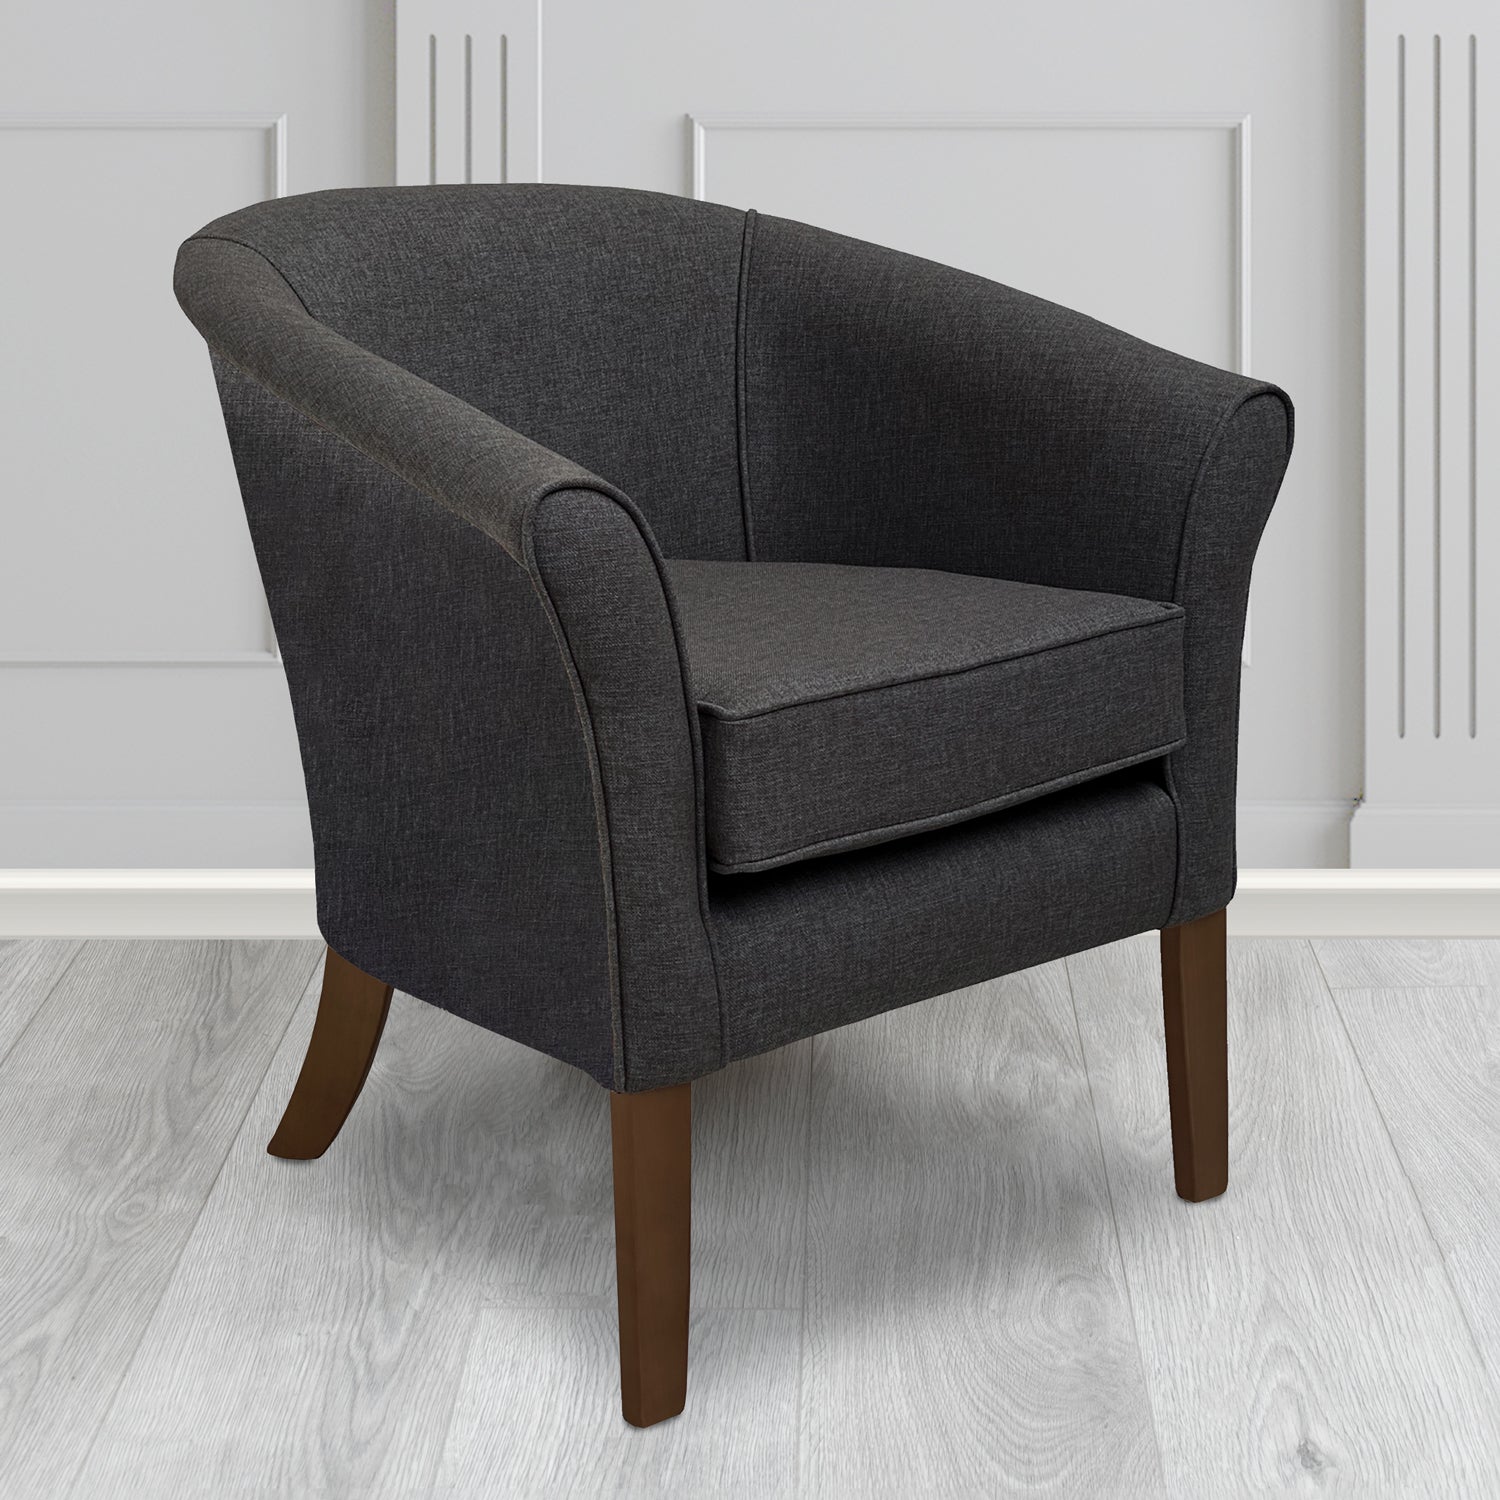 Aspen Tub Chair in Marna 903 Charcoal Crib 5 Fabric - Antimicrobial, Stain Resistant & Waterproof - The Tub Chair Shop